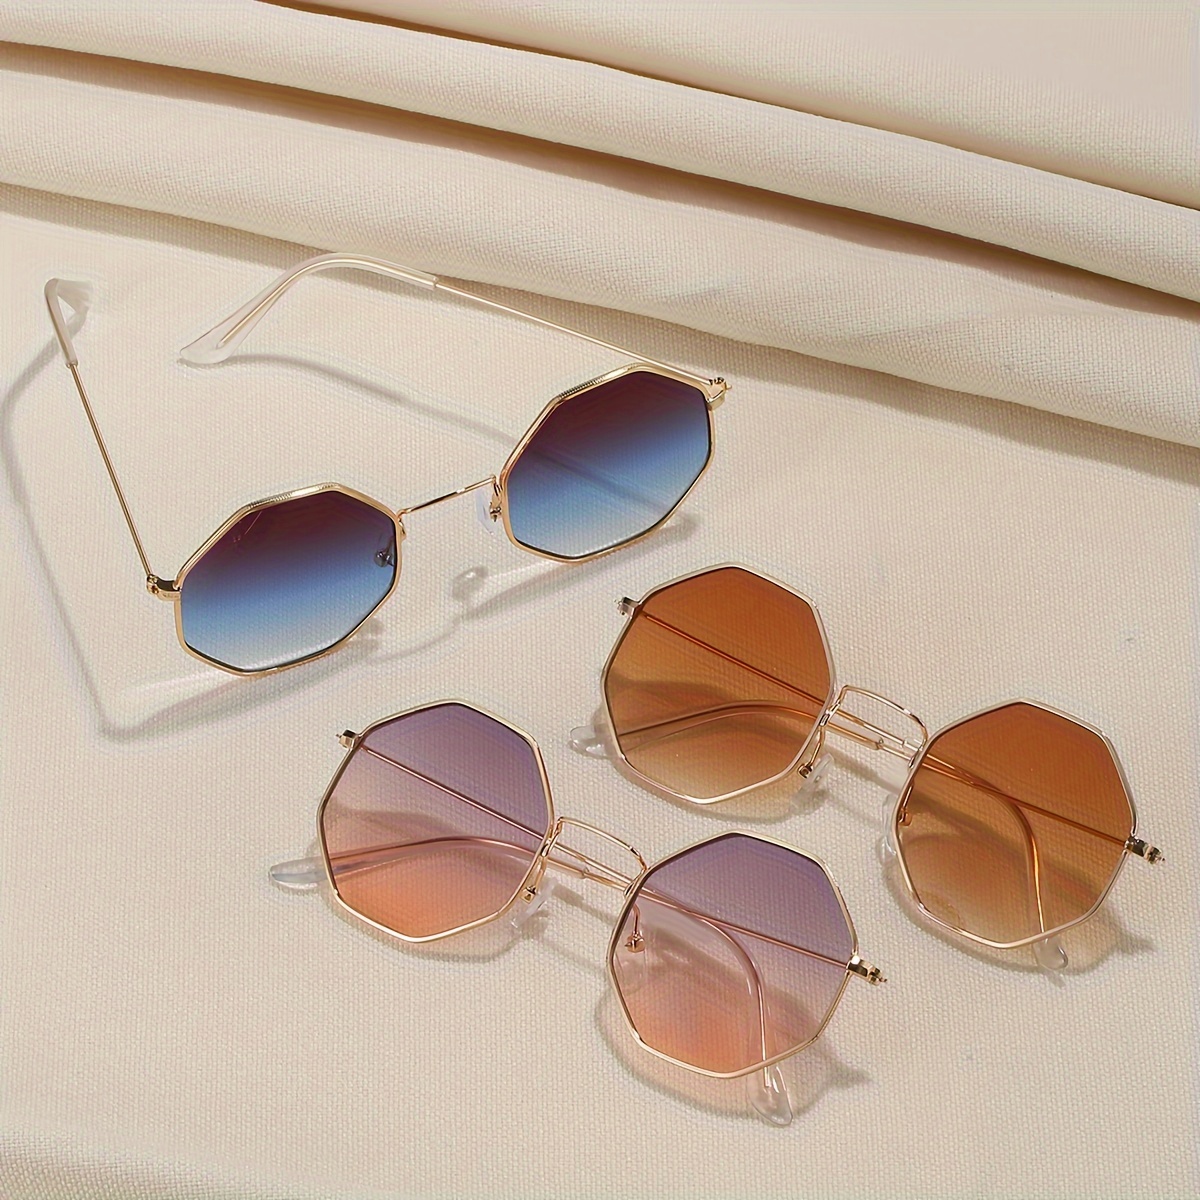 

3pcs Irregular Candy Color Gradient Glasses For Decoration For Driving Travel Beach